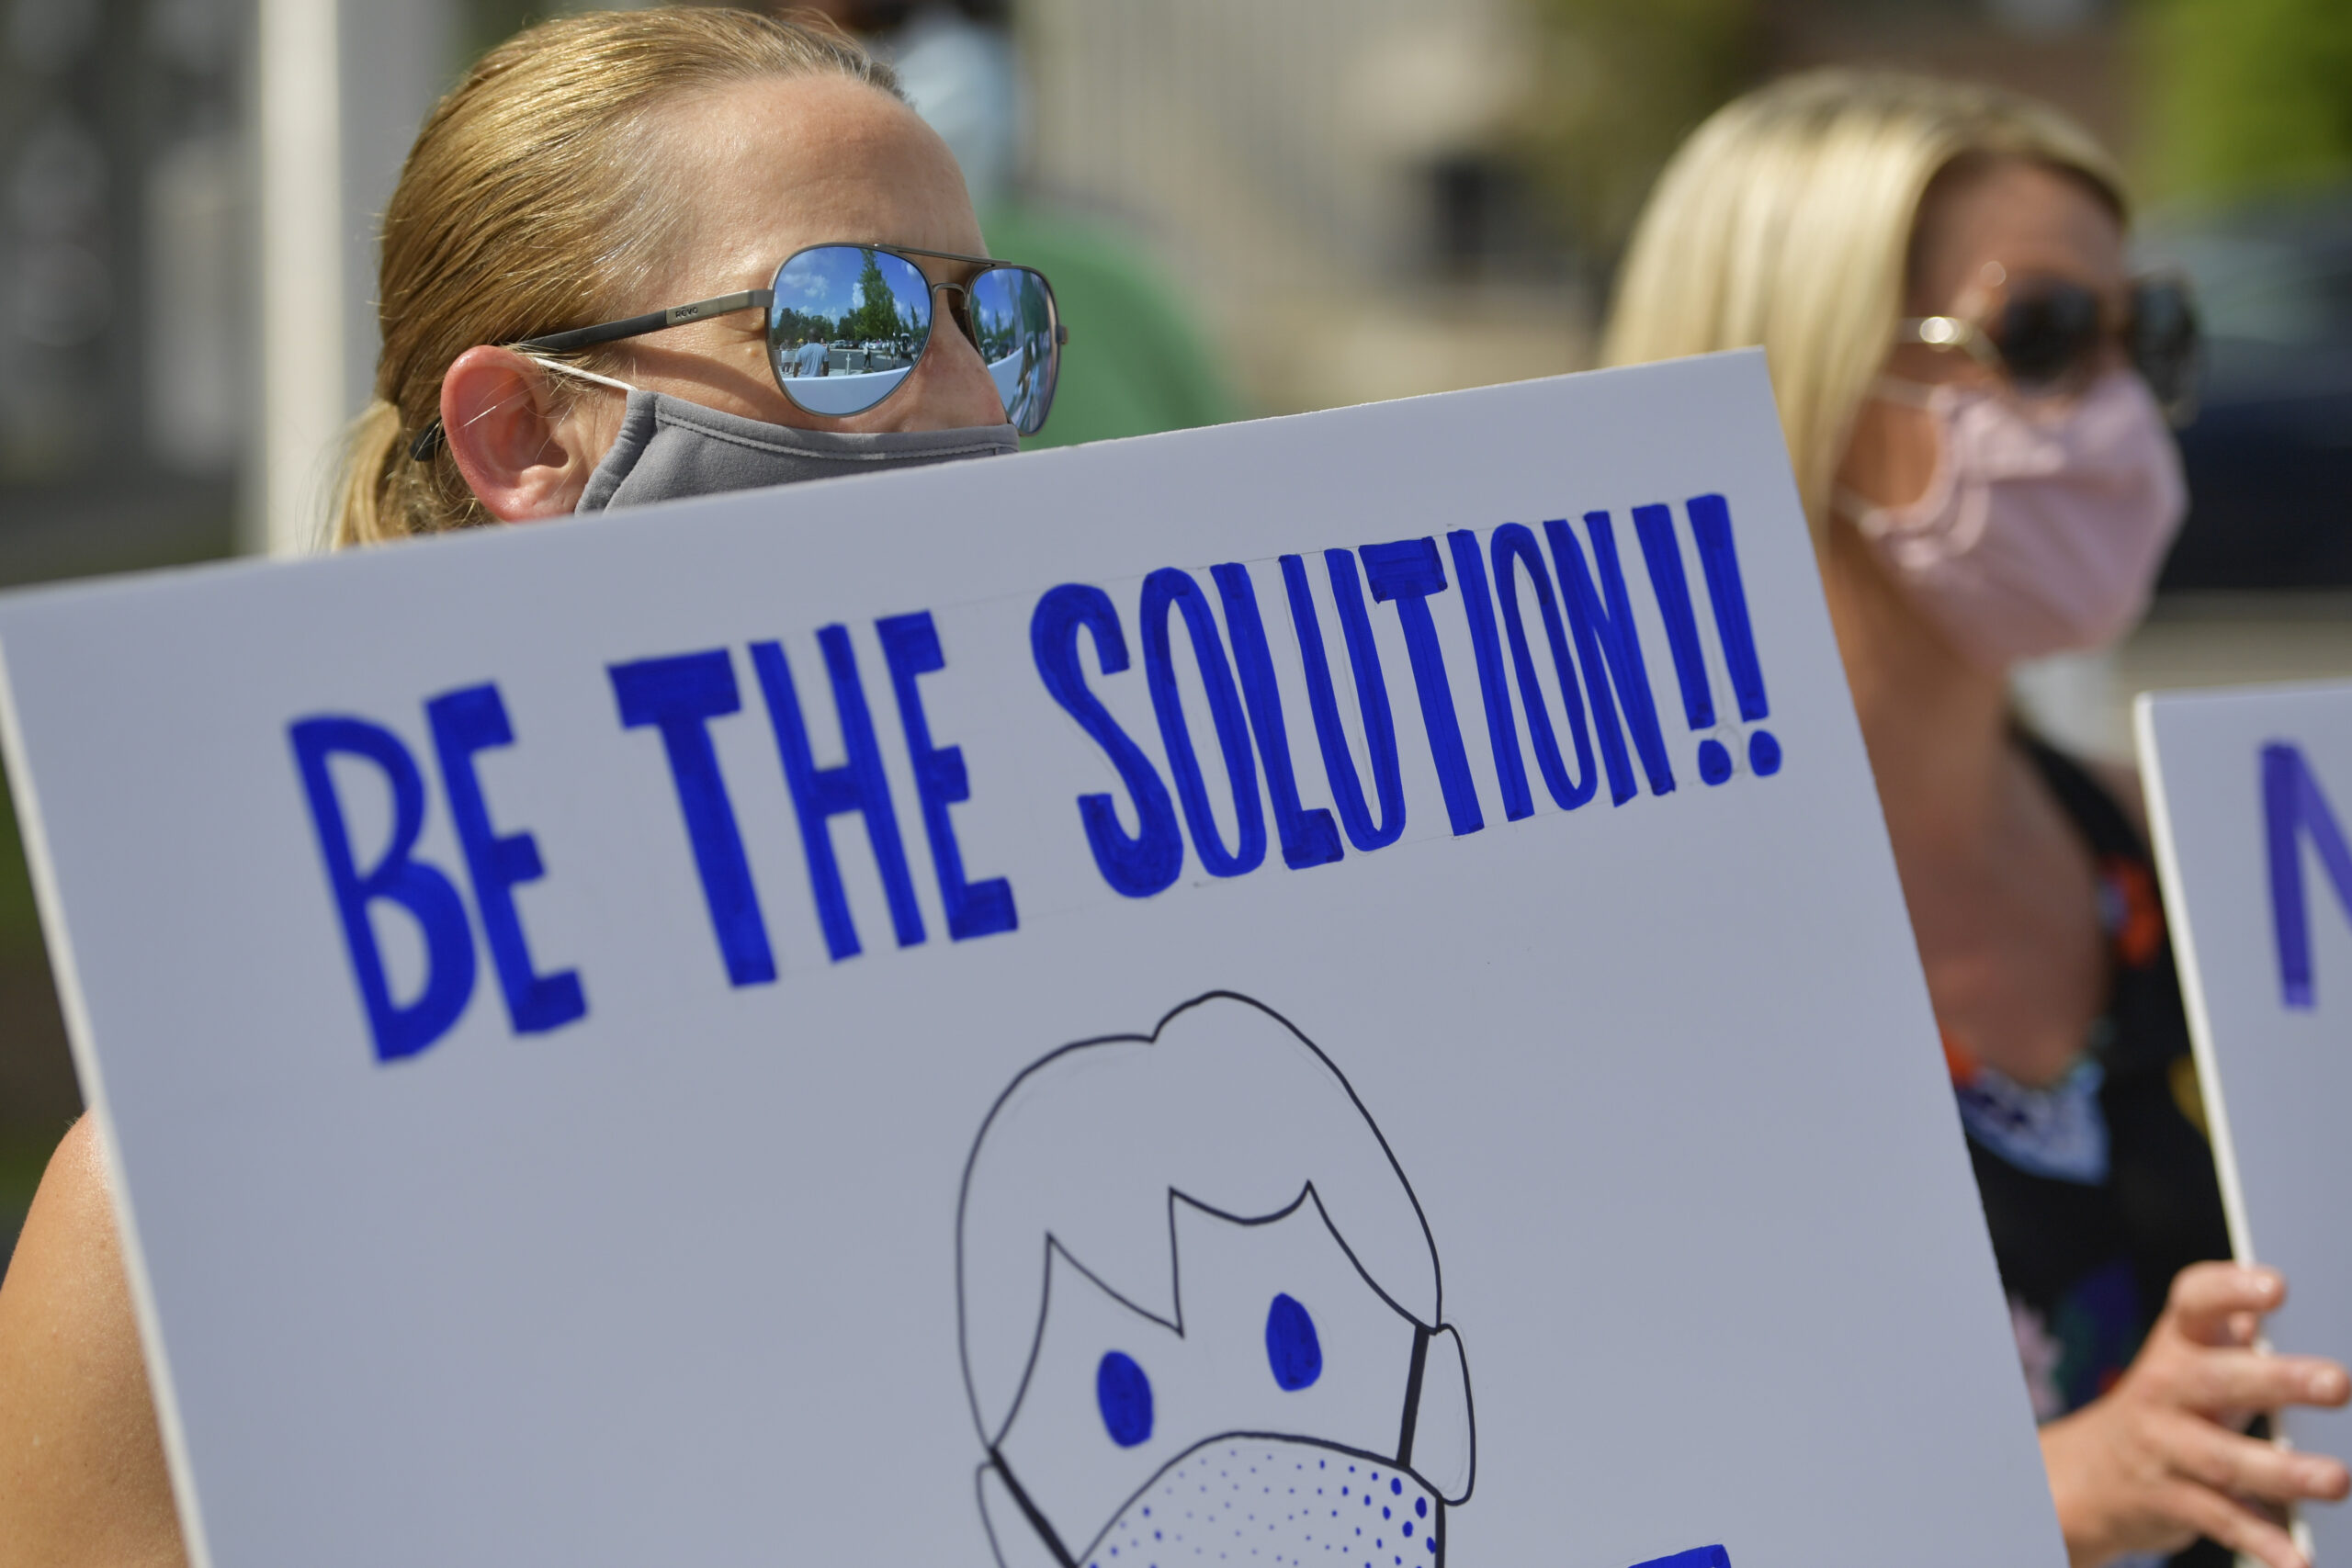 A woman in sunglasses and a mask holds a sign that says "Be the solution!" 